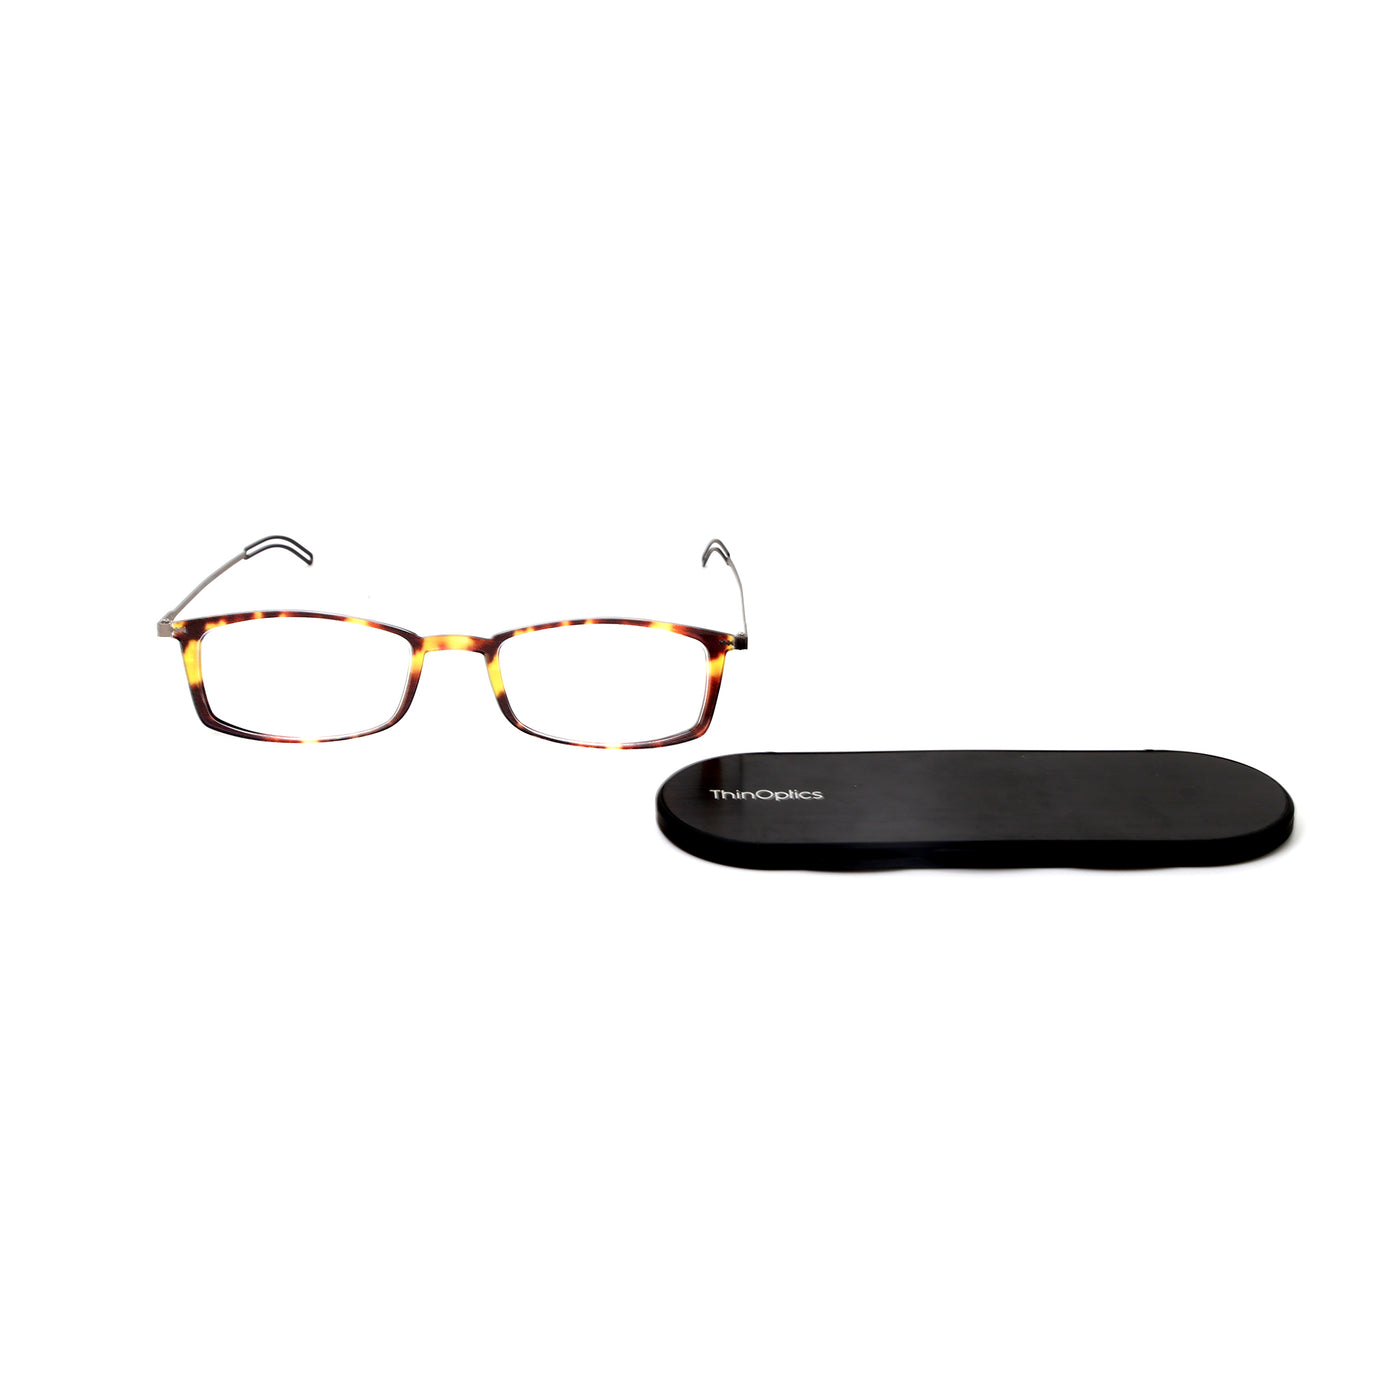 Thin Optics Connect for Men/Women | Reading Glasses - Vision Express Optical Philippines